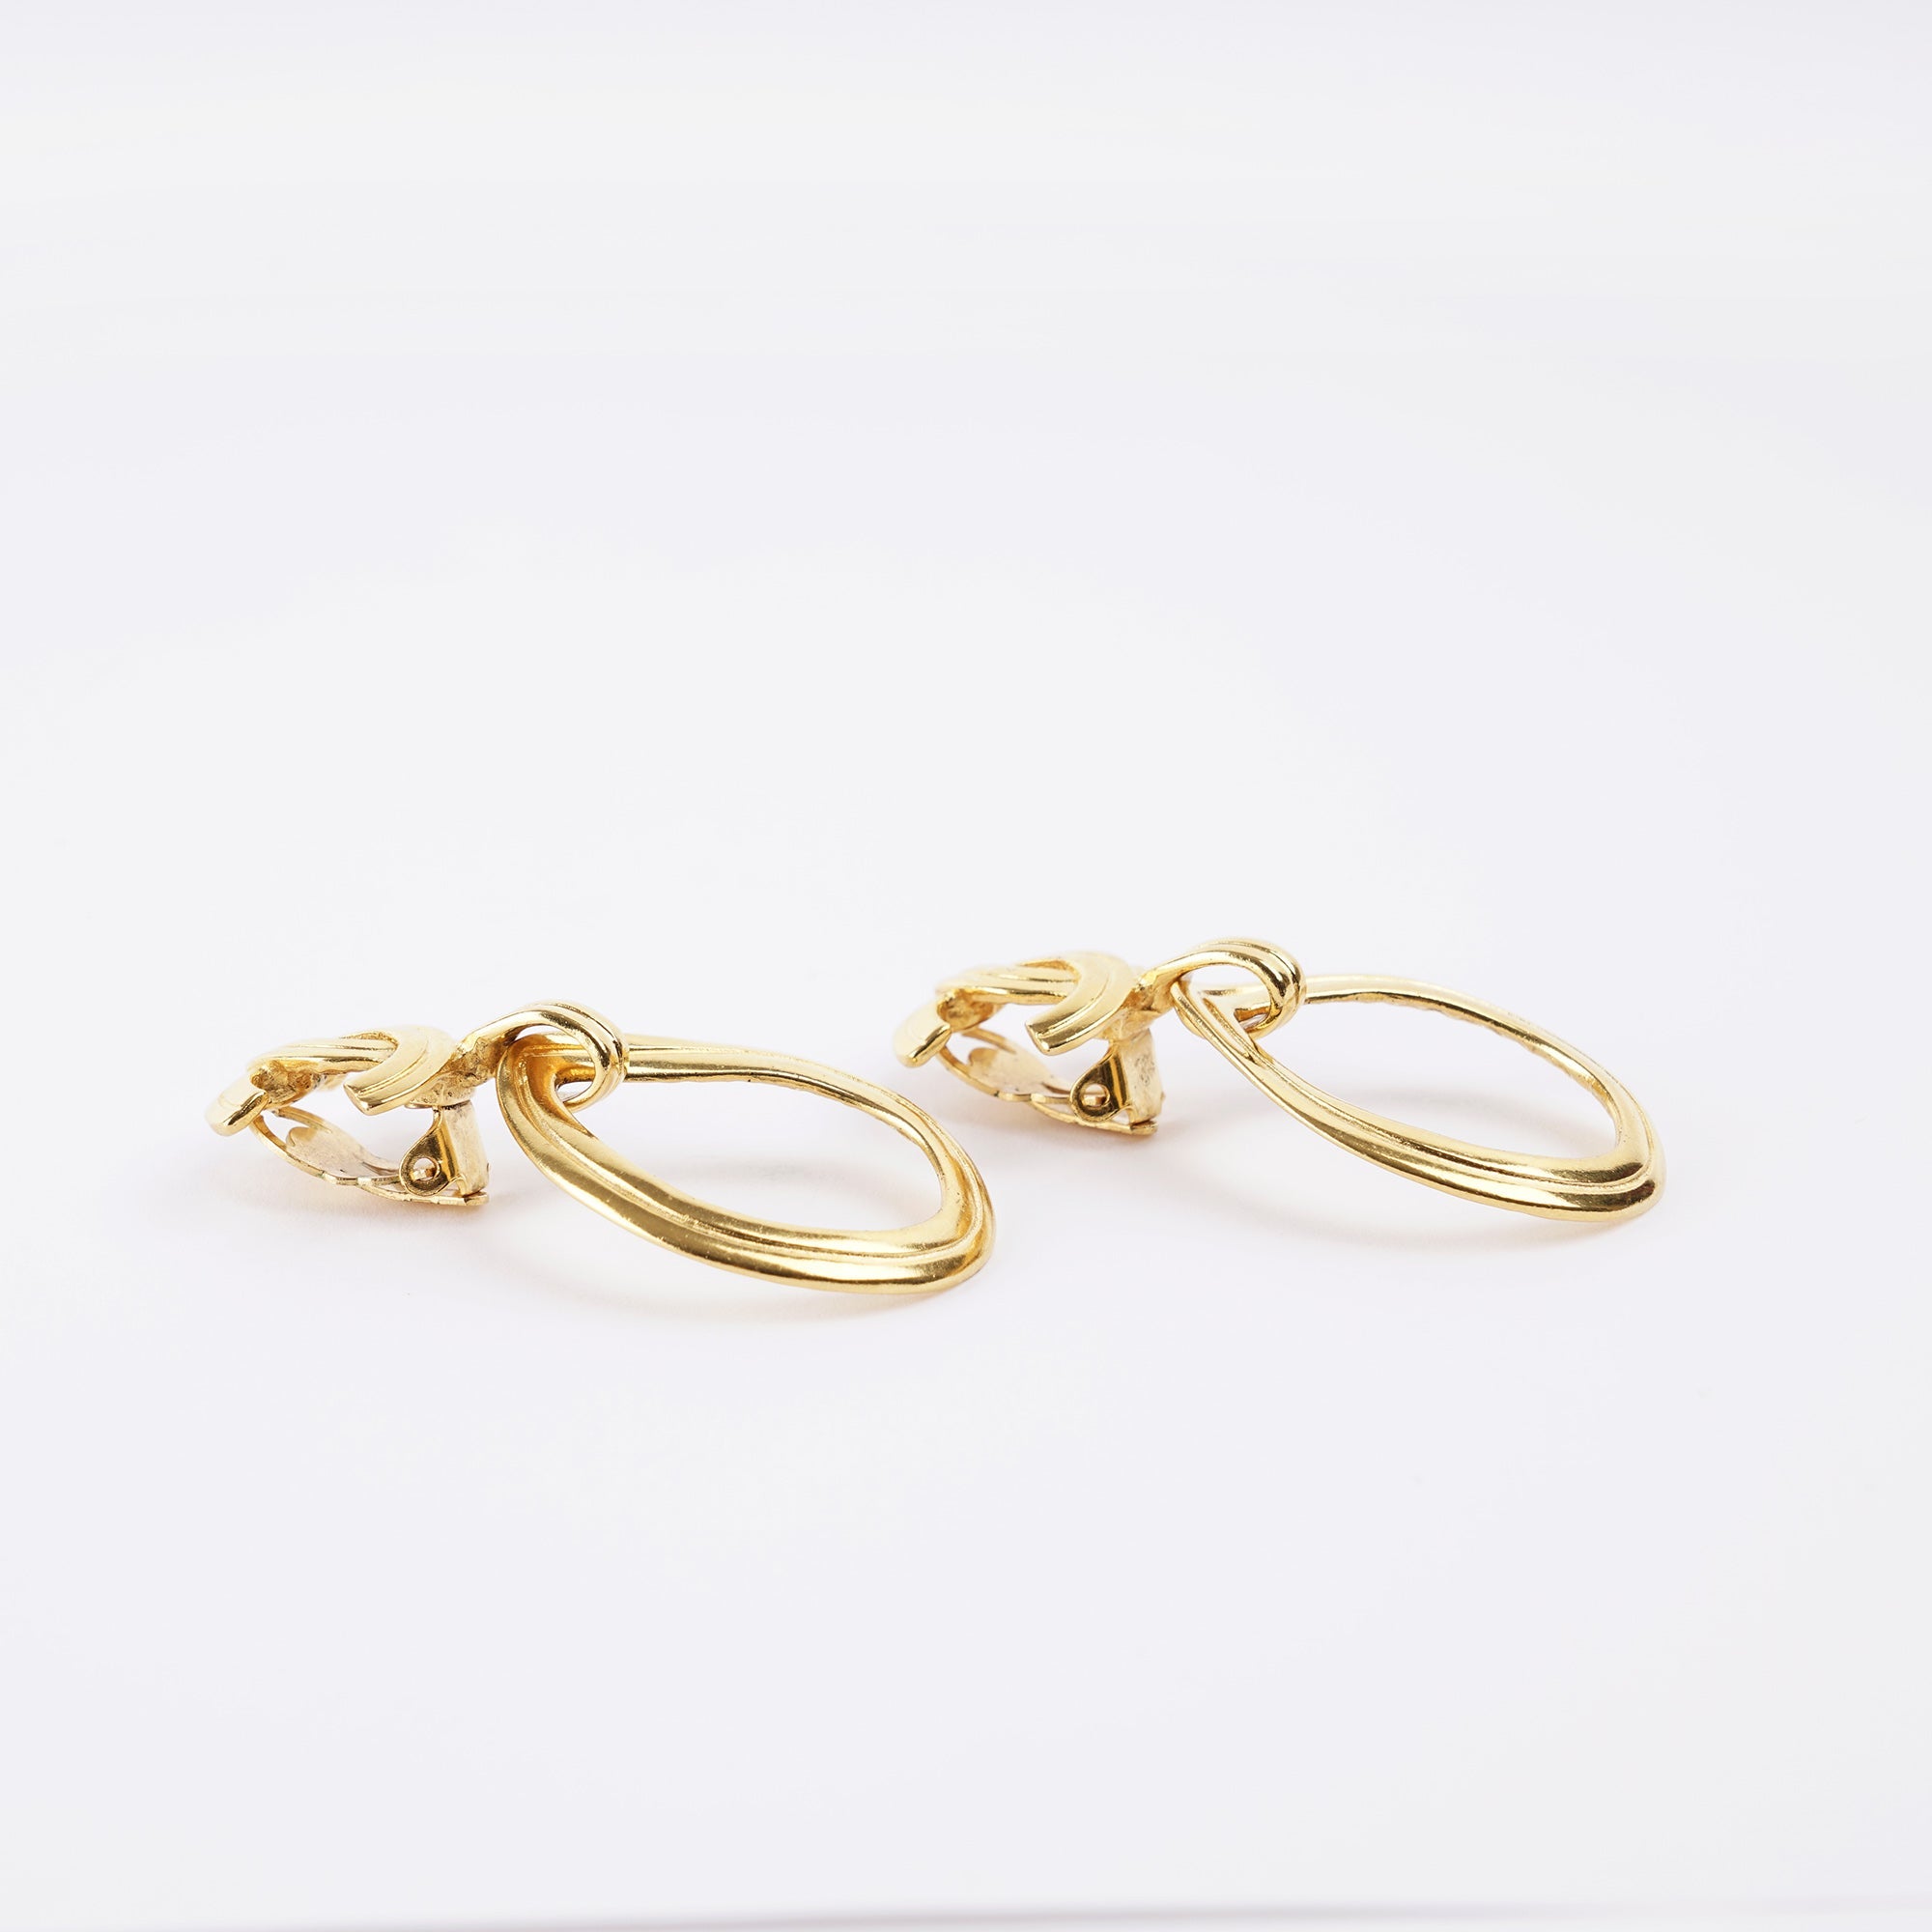 Large Vintage CC Clips Earrings - CHANEL - Affordable Luxury image